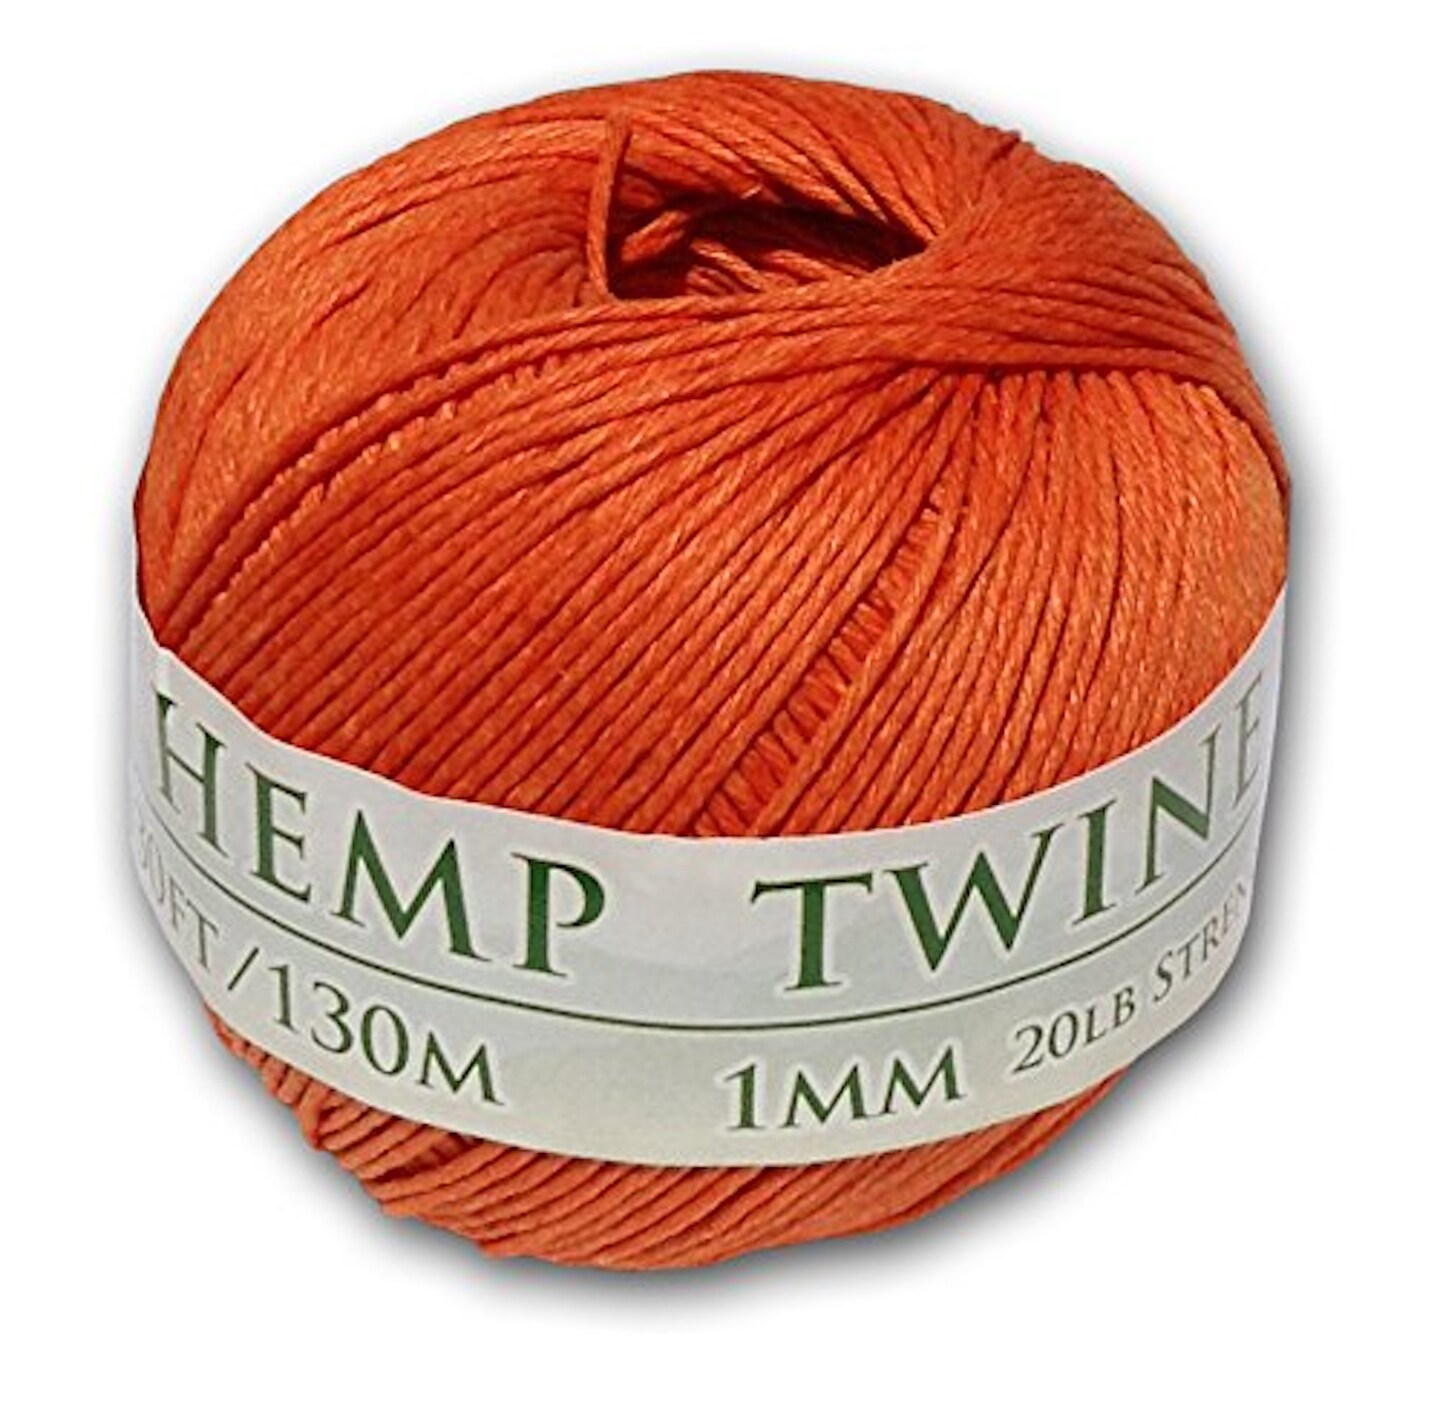 Red Twine String 1mm Wide 